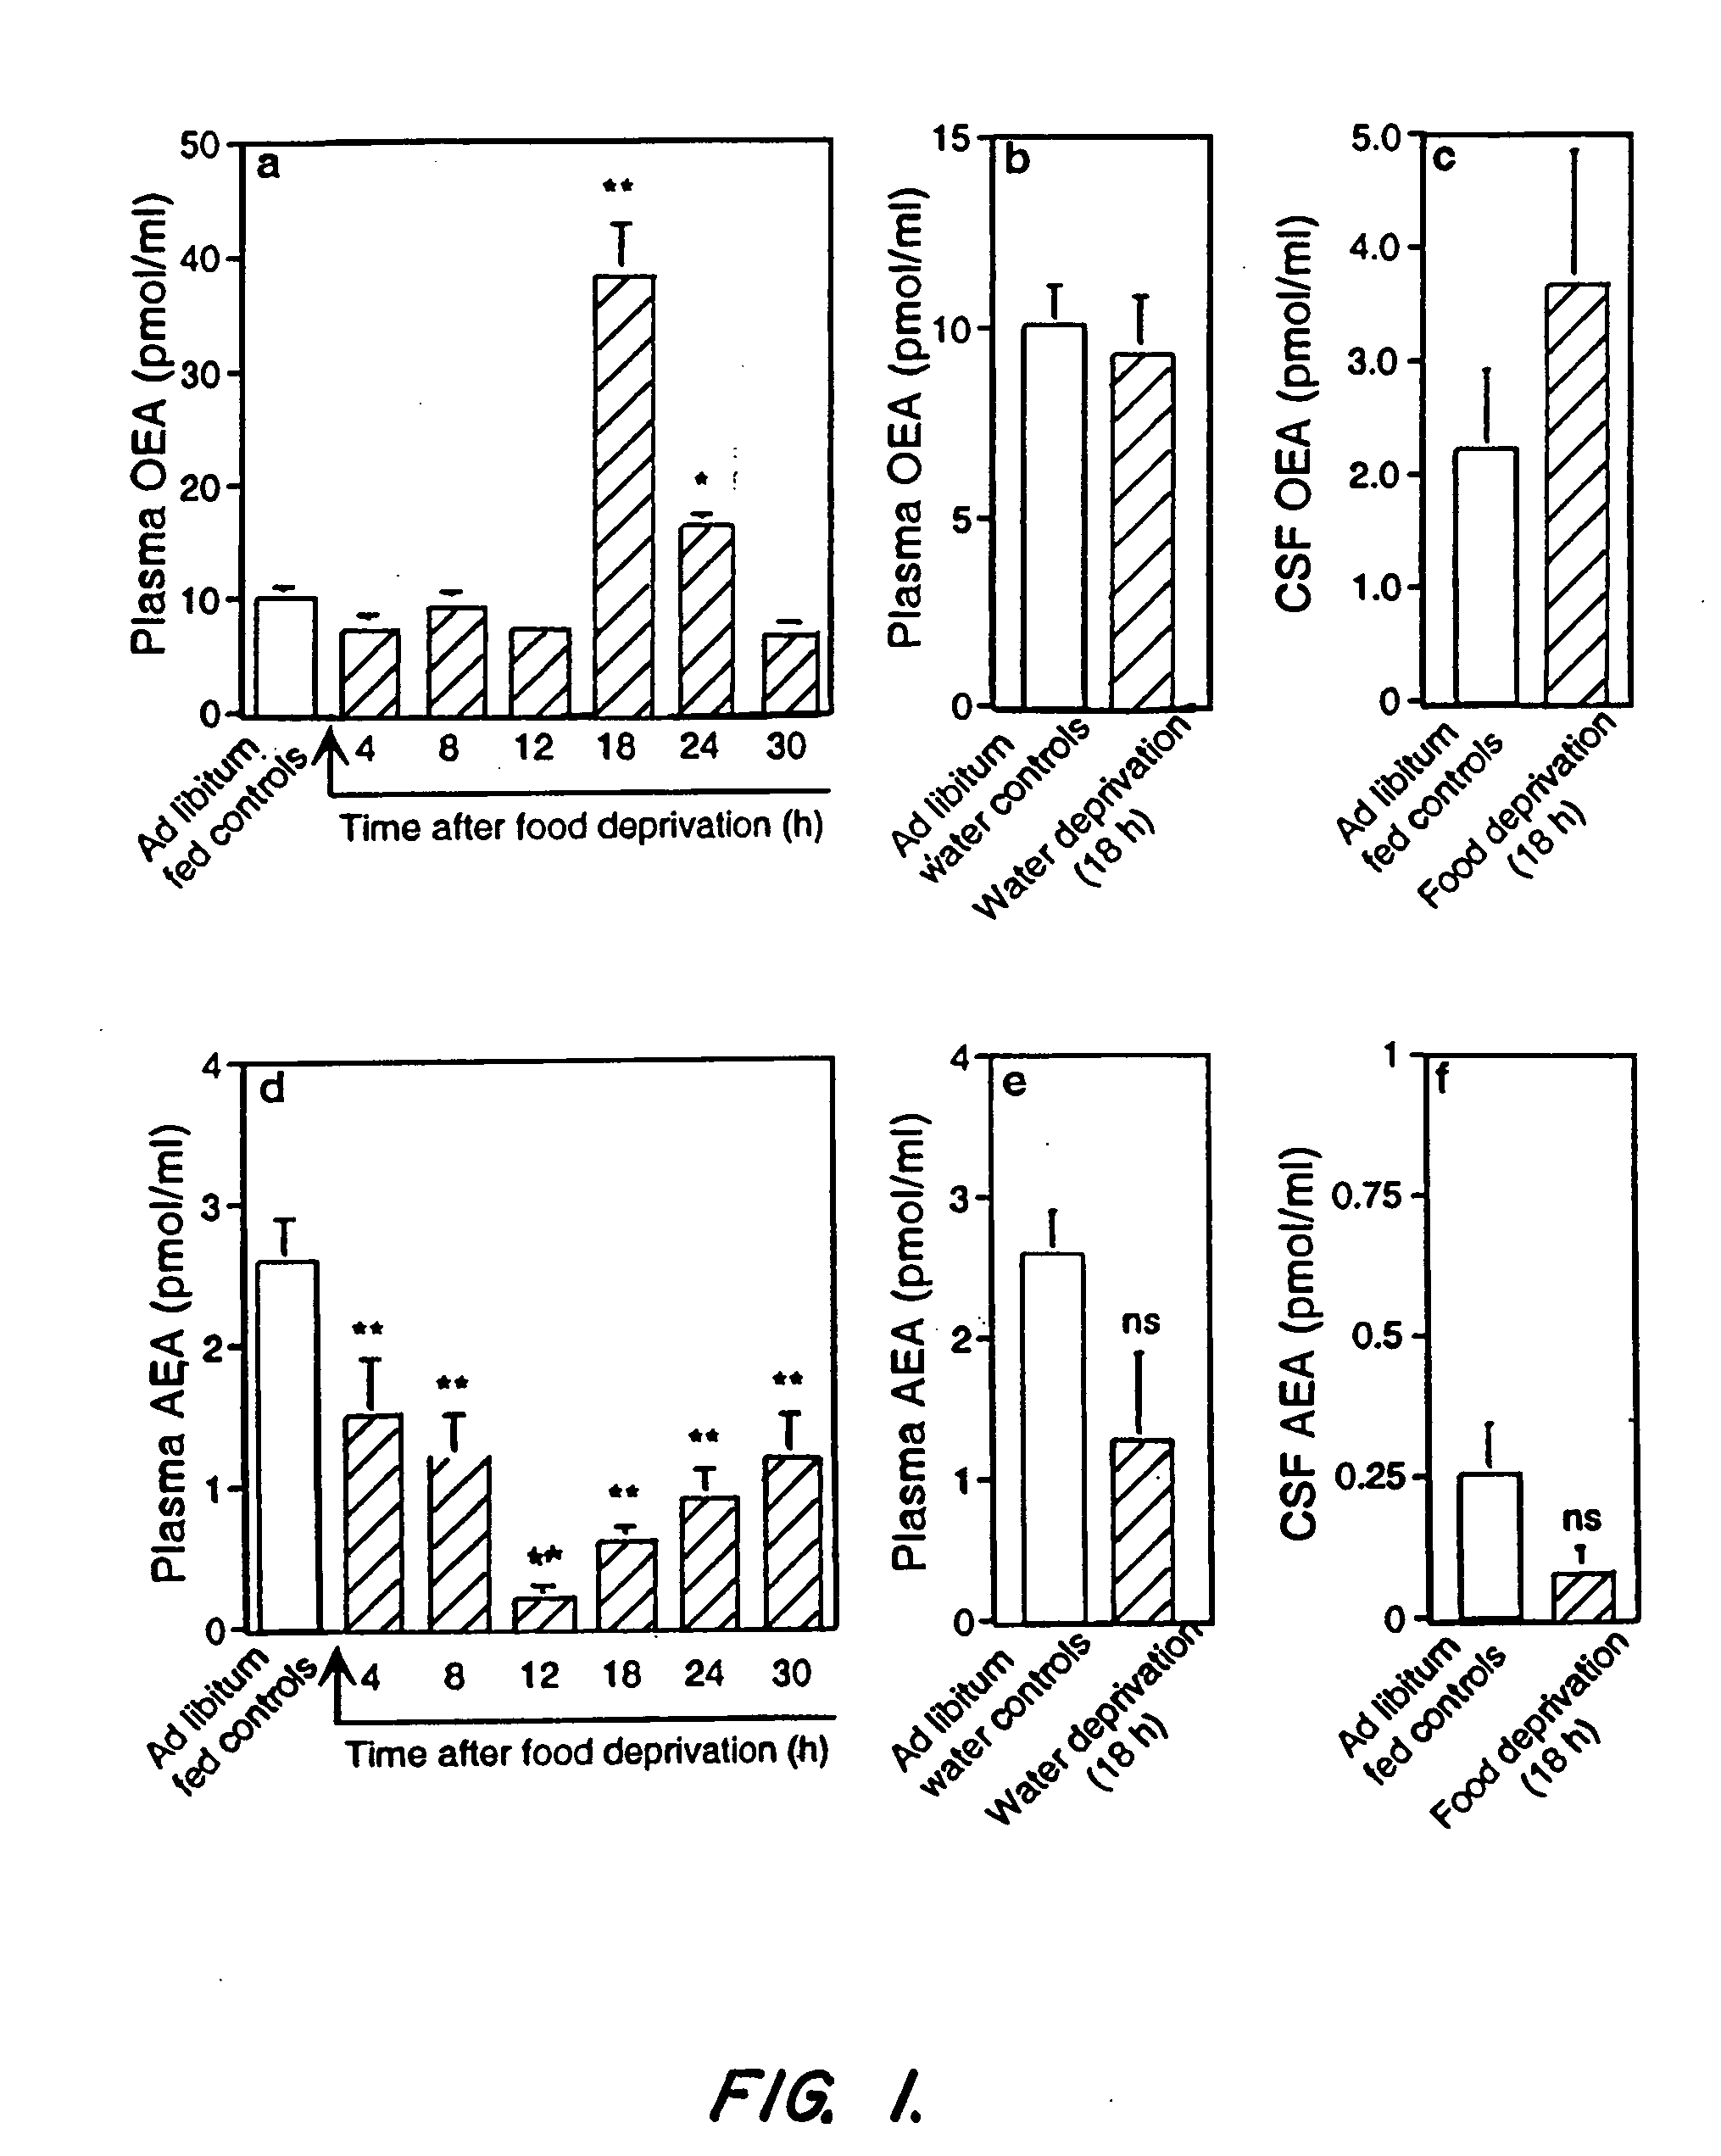 Dietary and other compositions, compounds, and methods for reducing body fat, controlling appetite, and modulating fatty acid metabolism